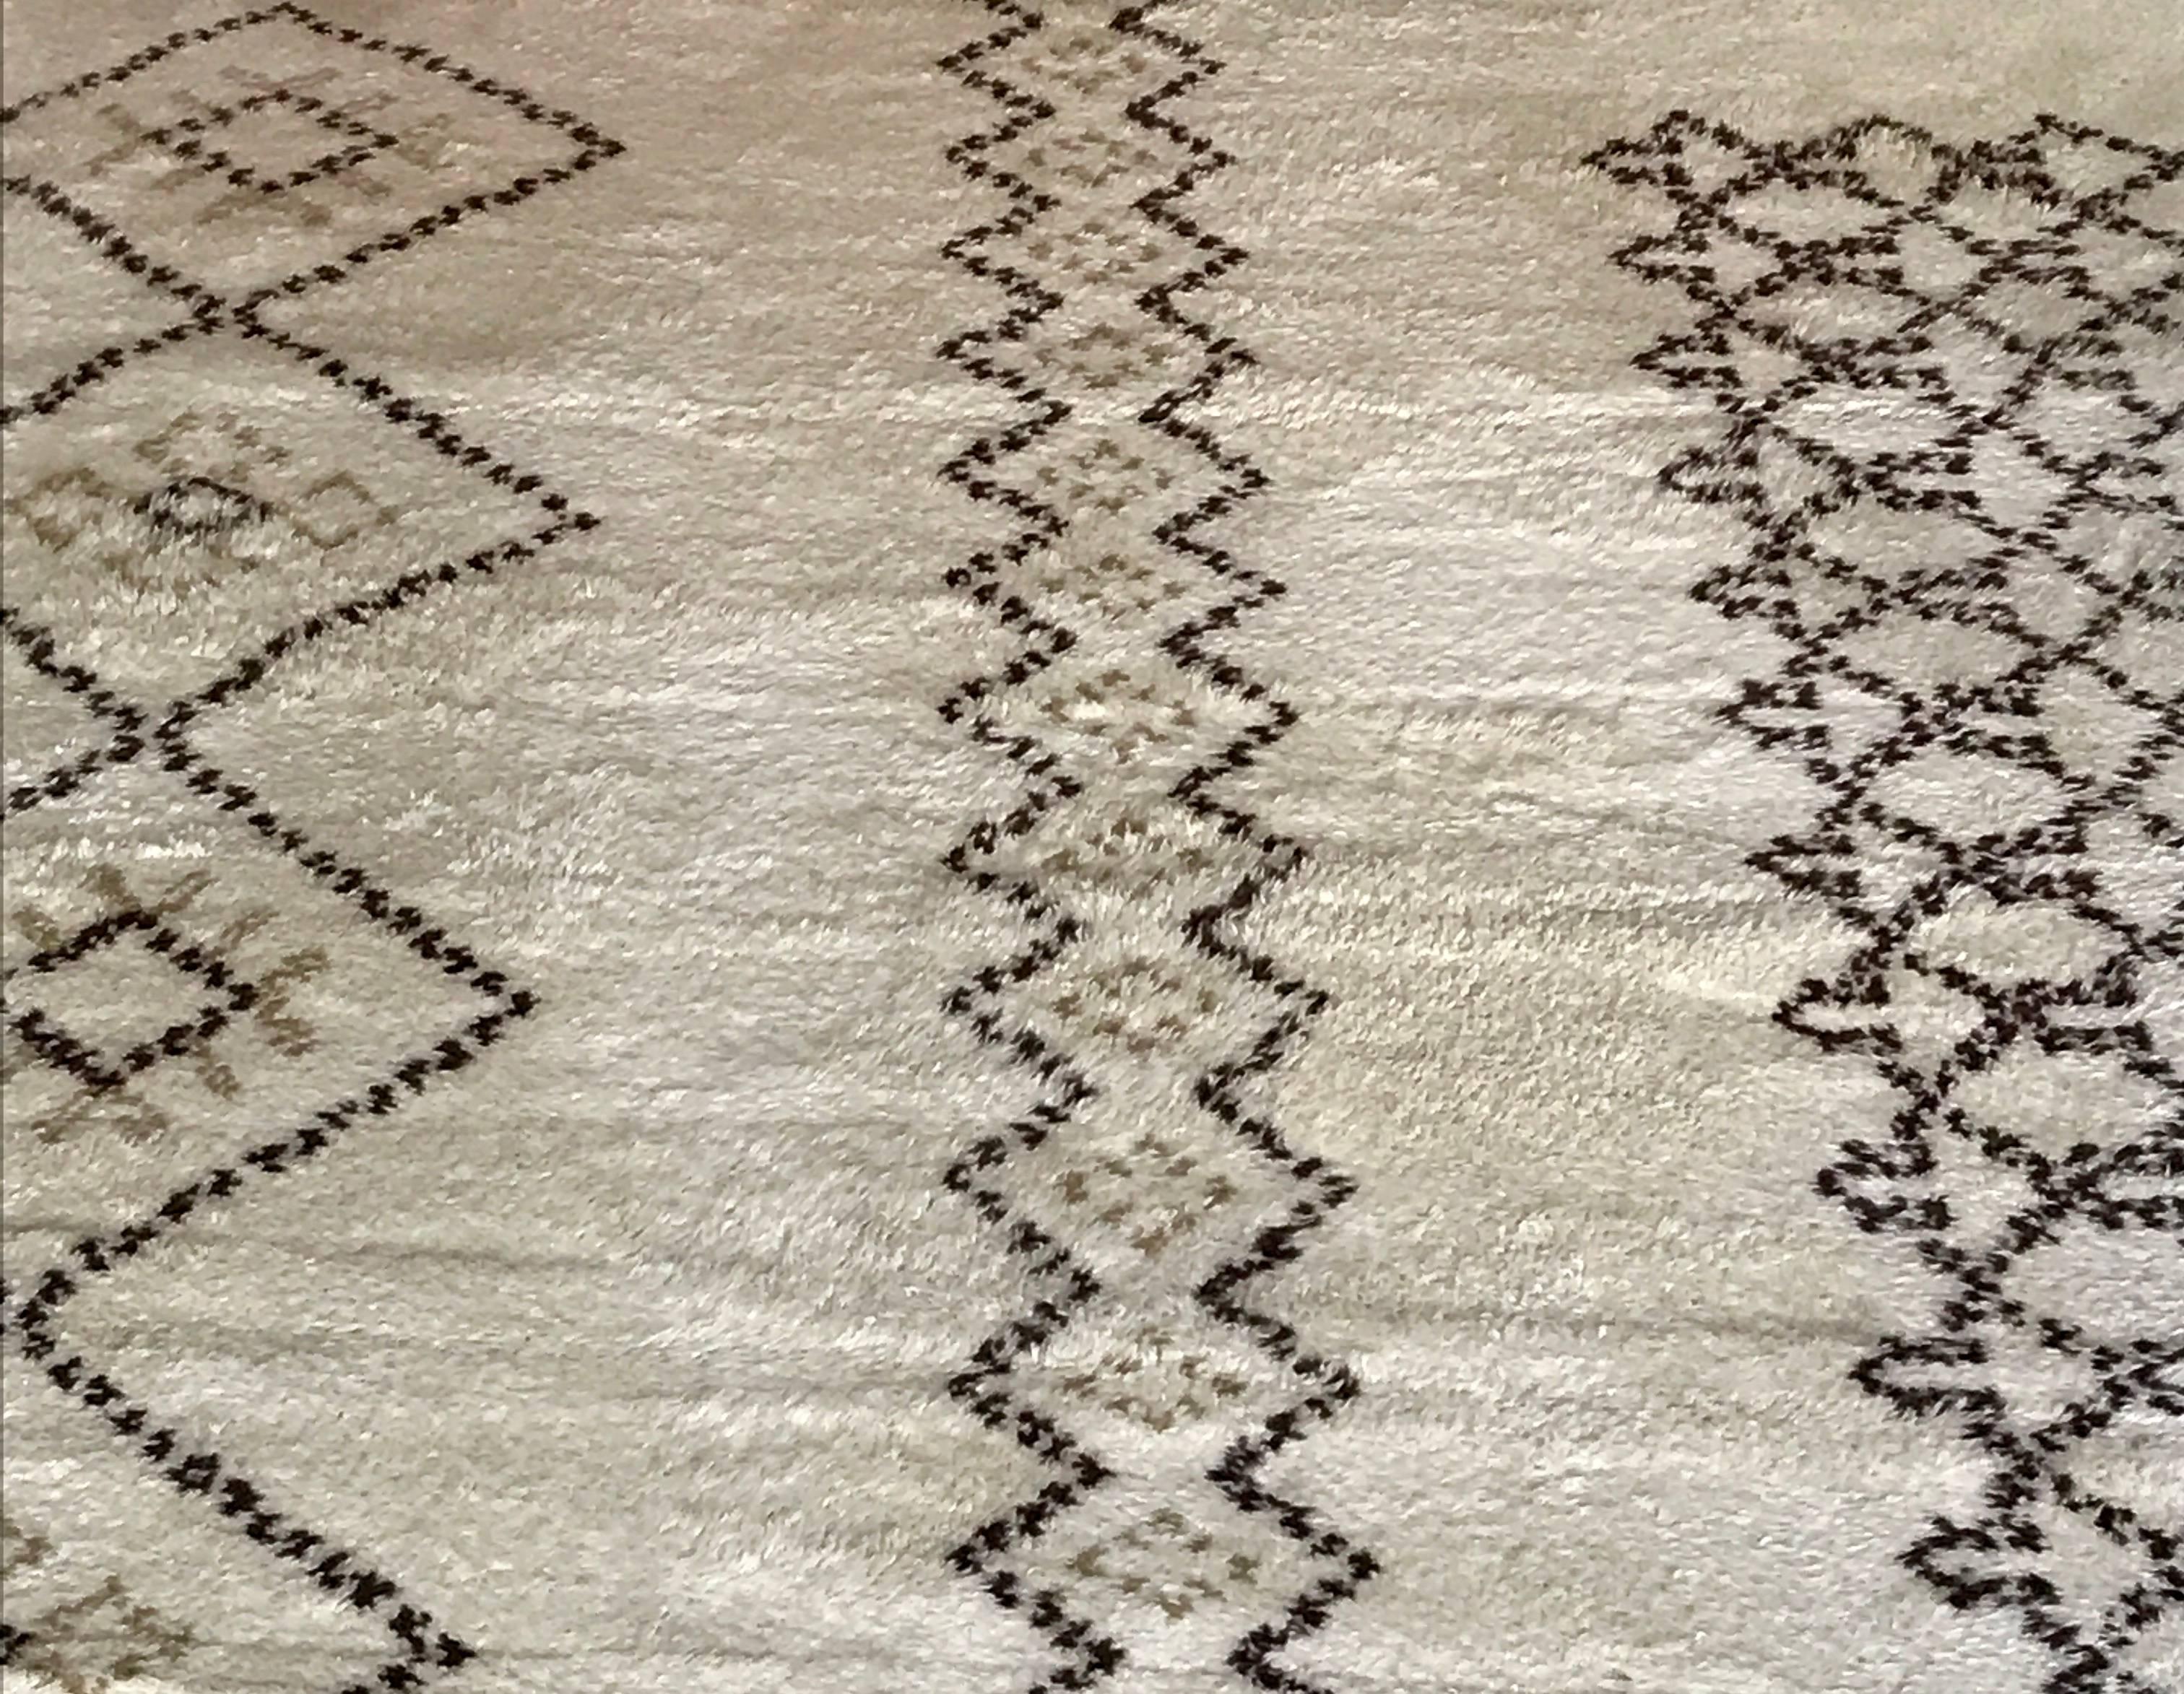 Gorgeous handmade room size vintage Moroccan rug with thick soft pile made of undyed ivory/cream and brown wool. 12 x 15. Exceptional pattern. Hand-knotted.